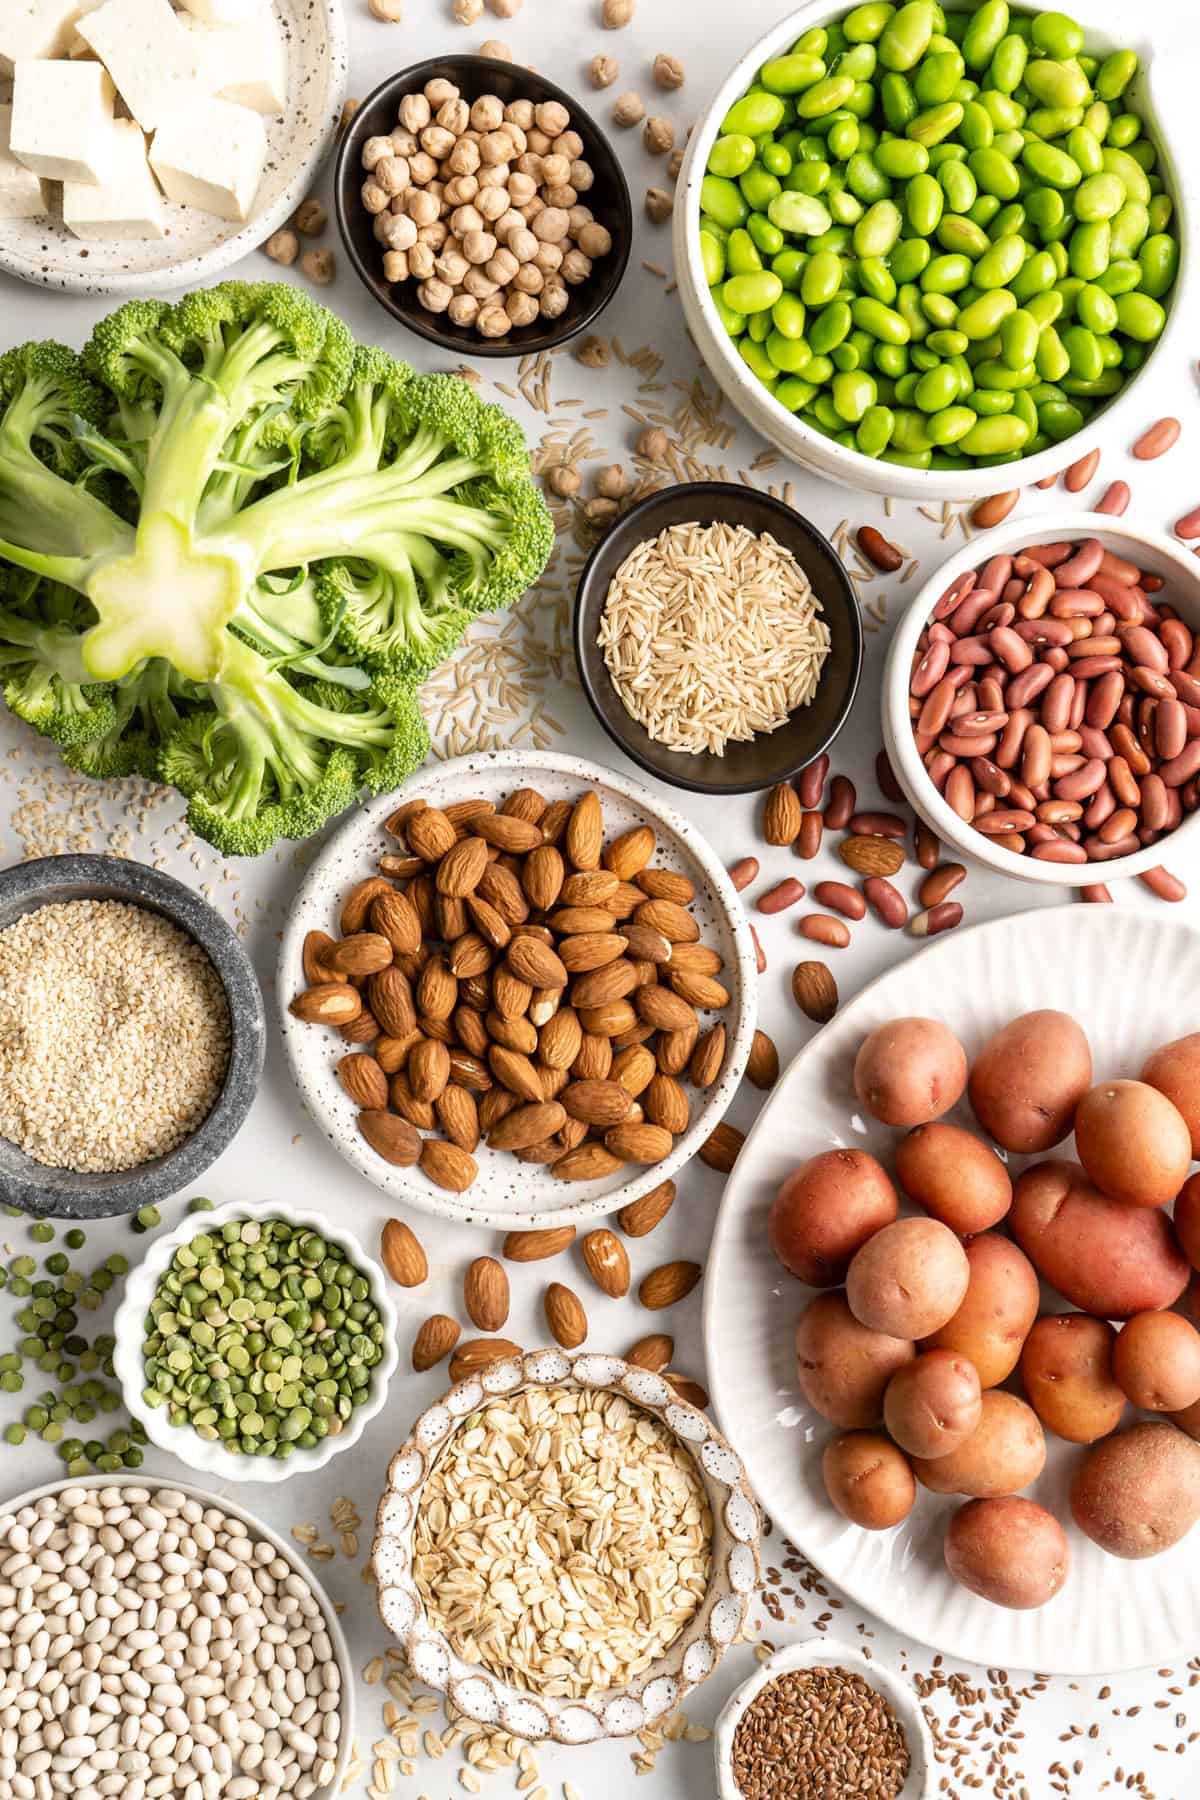 a variety of vegan protein sources including broccoli, potatoes, nuts, seeds and legumes